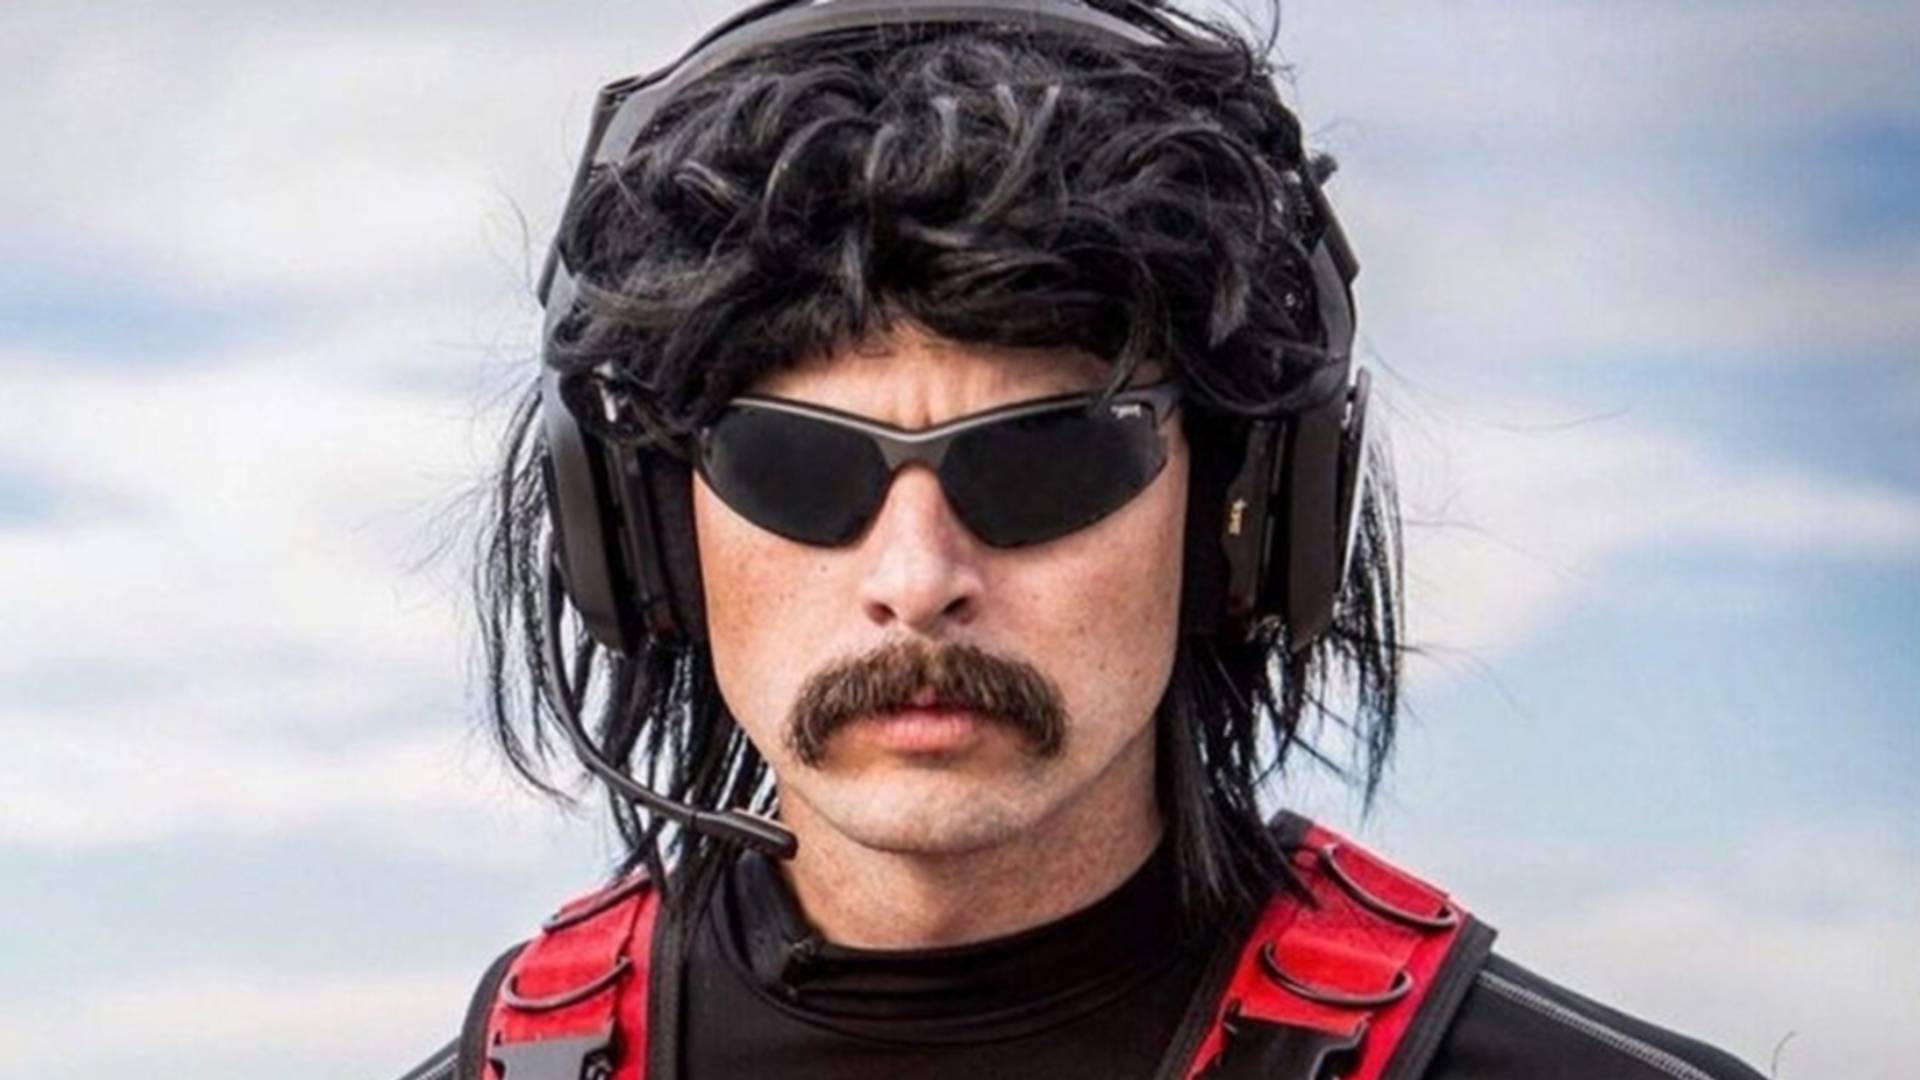 How tall is Dr Disrespect?